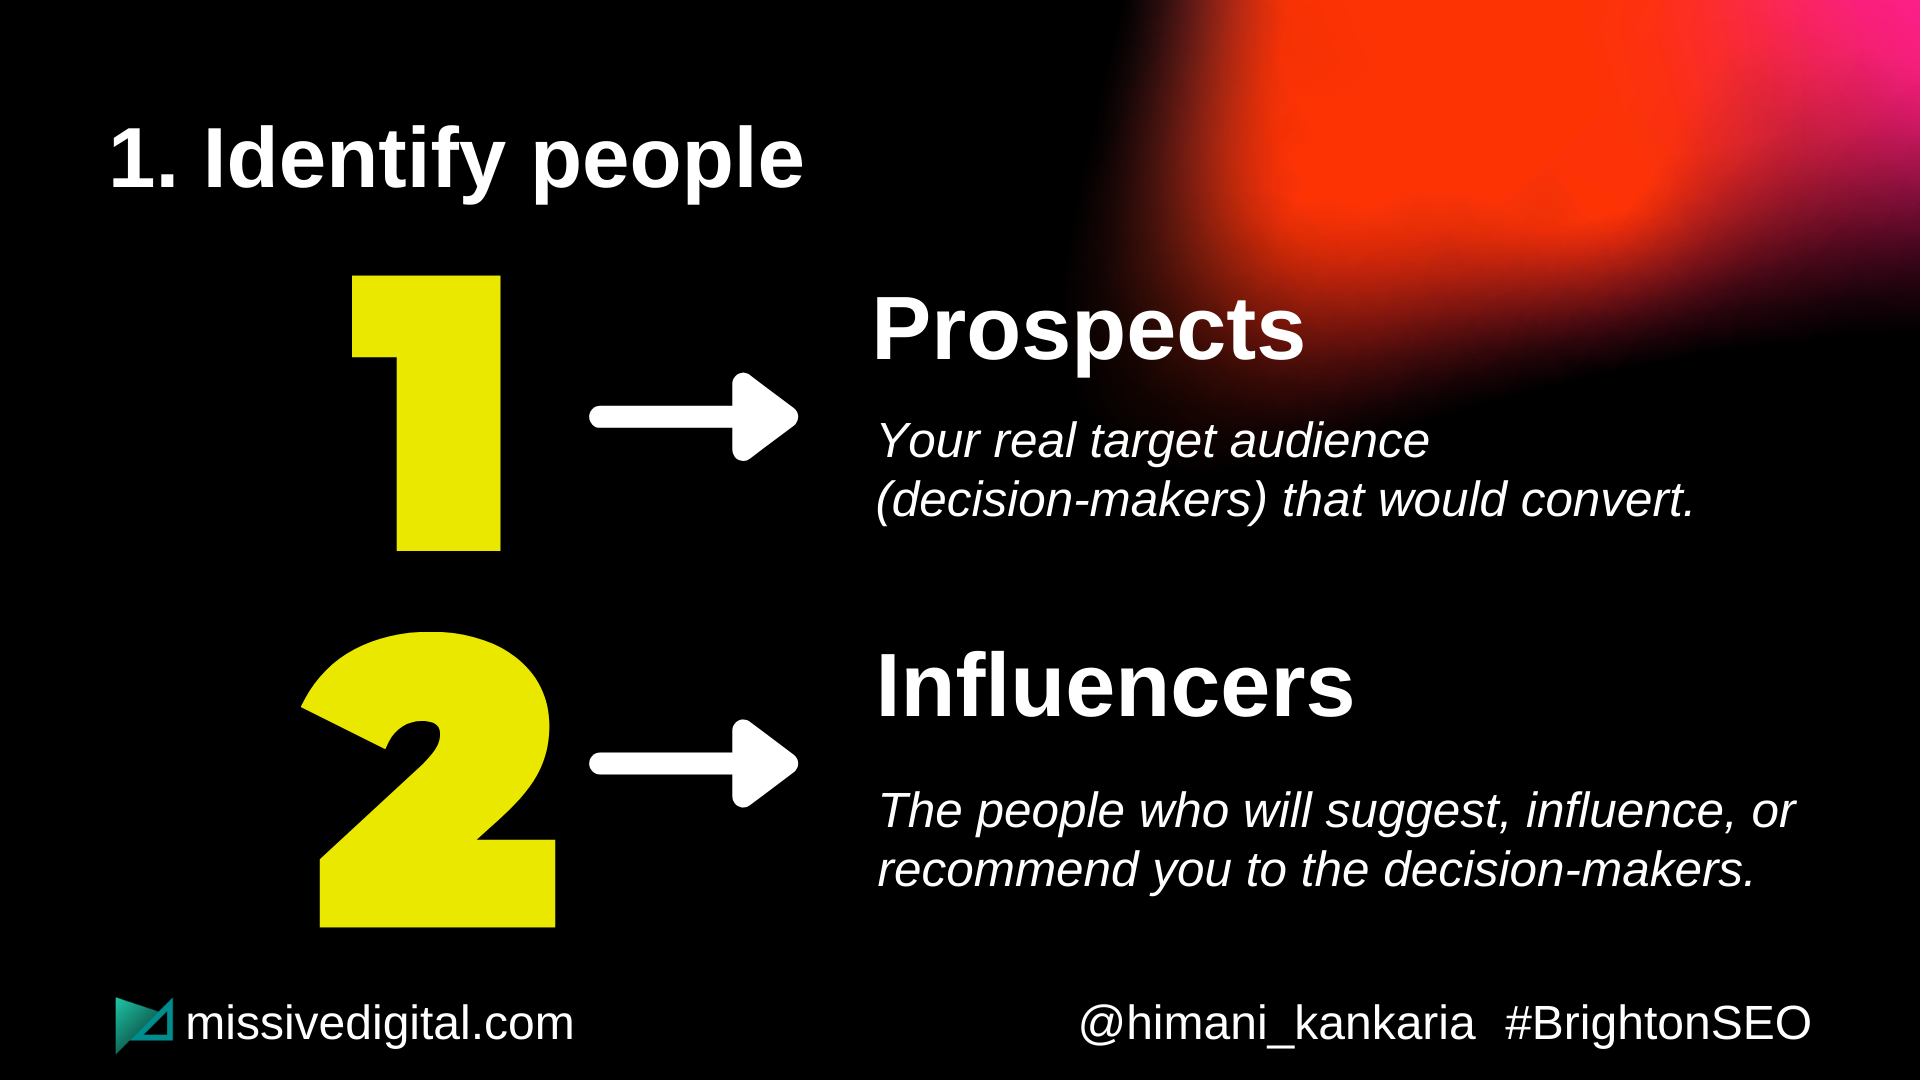 Identify your target audience as Himani Kankaria recommended in her BrightonSEO talk - this can prevent email marketing mistakes that can impact the trust of your emails.